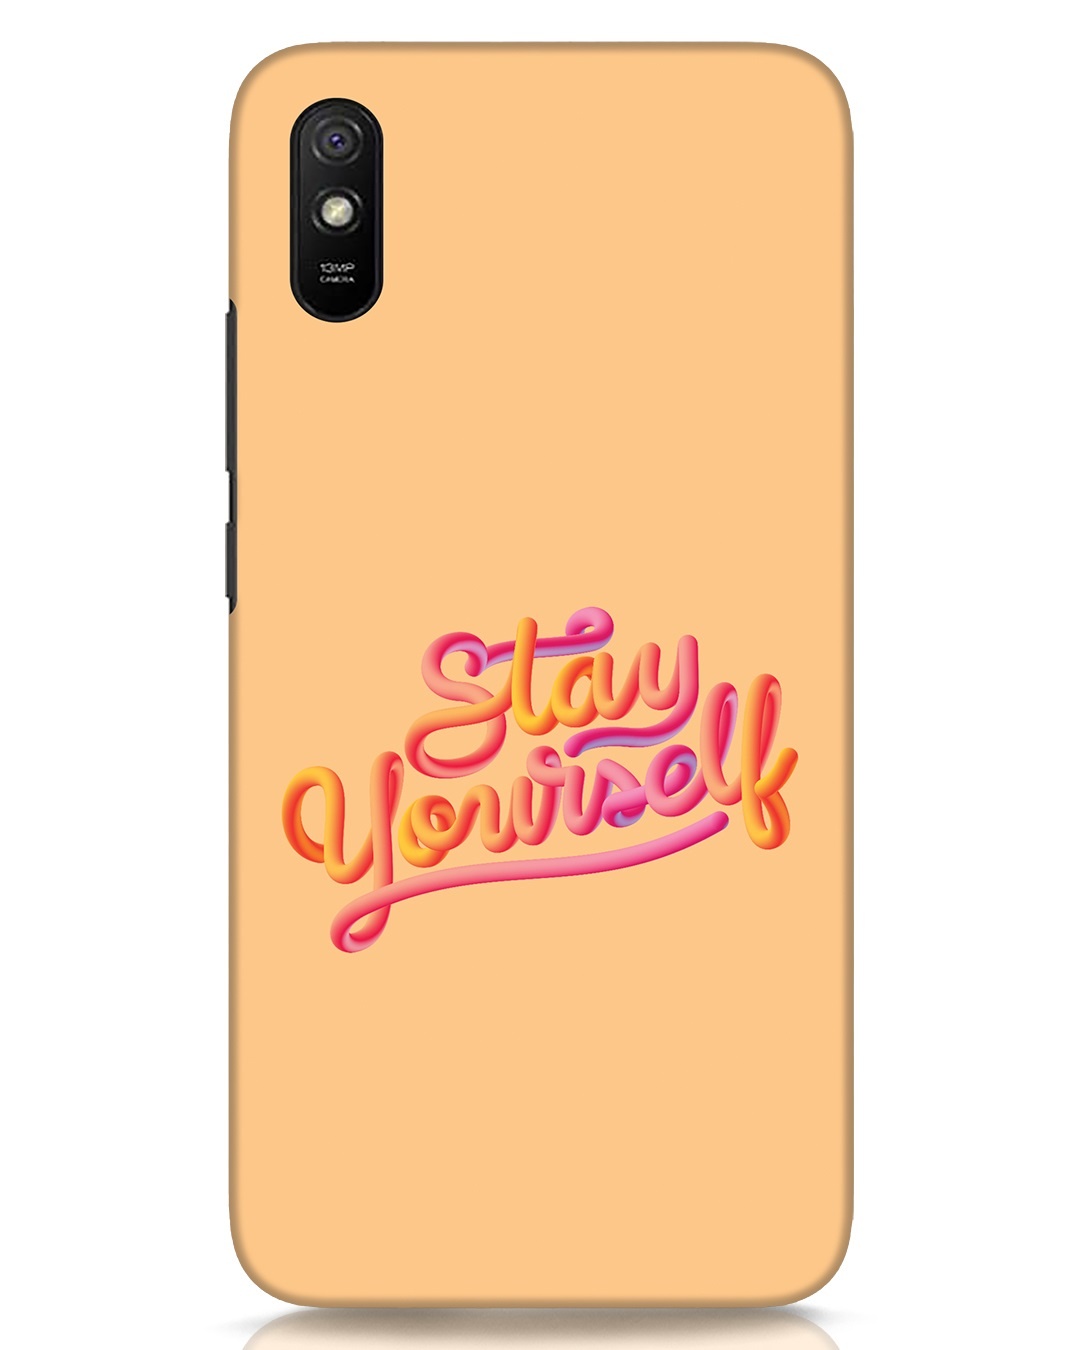 Buy Stay Yourslef Xiaomi Redmi 9a Mobile Cover Online In India At Bewakoof 7368